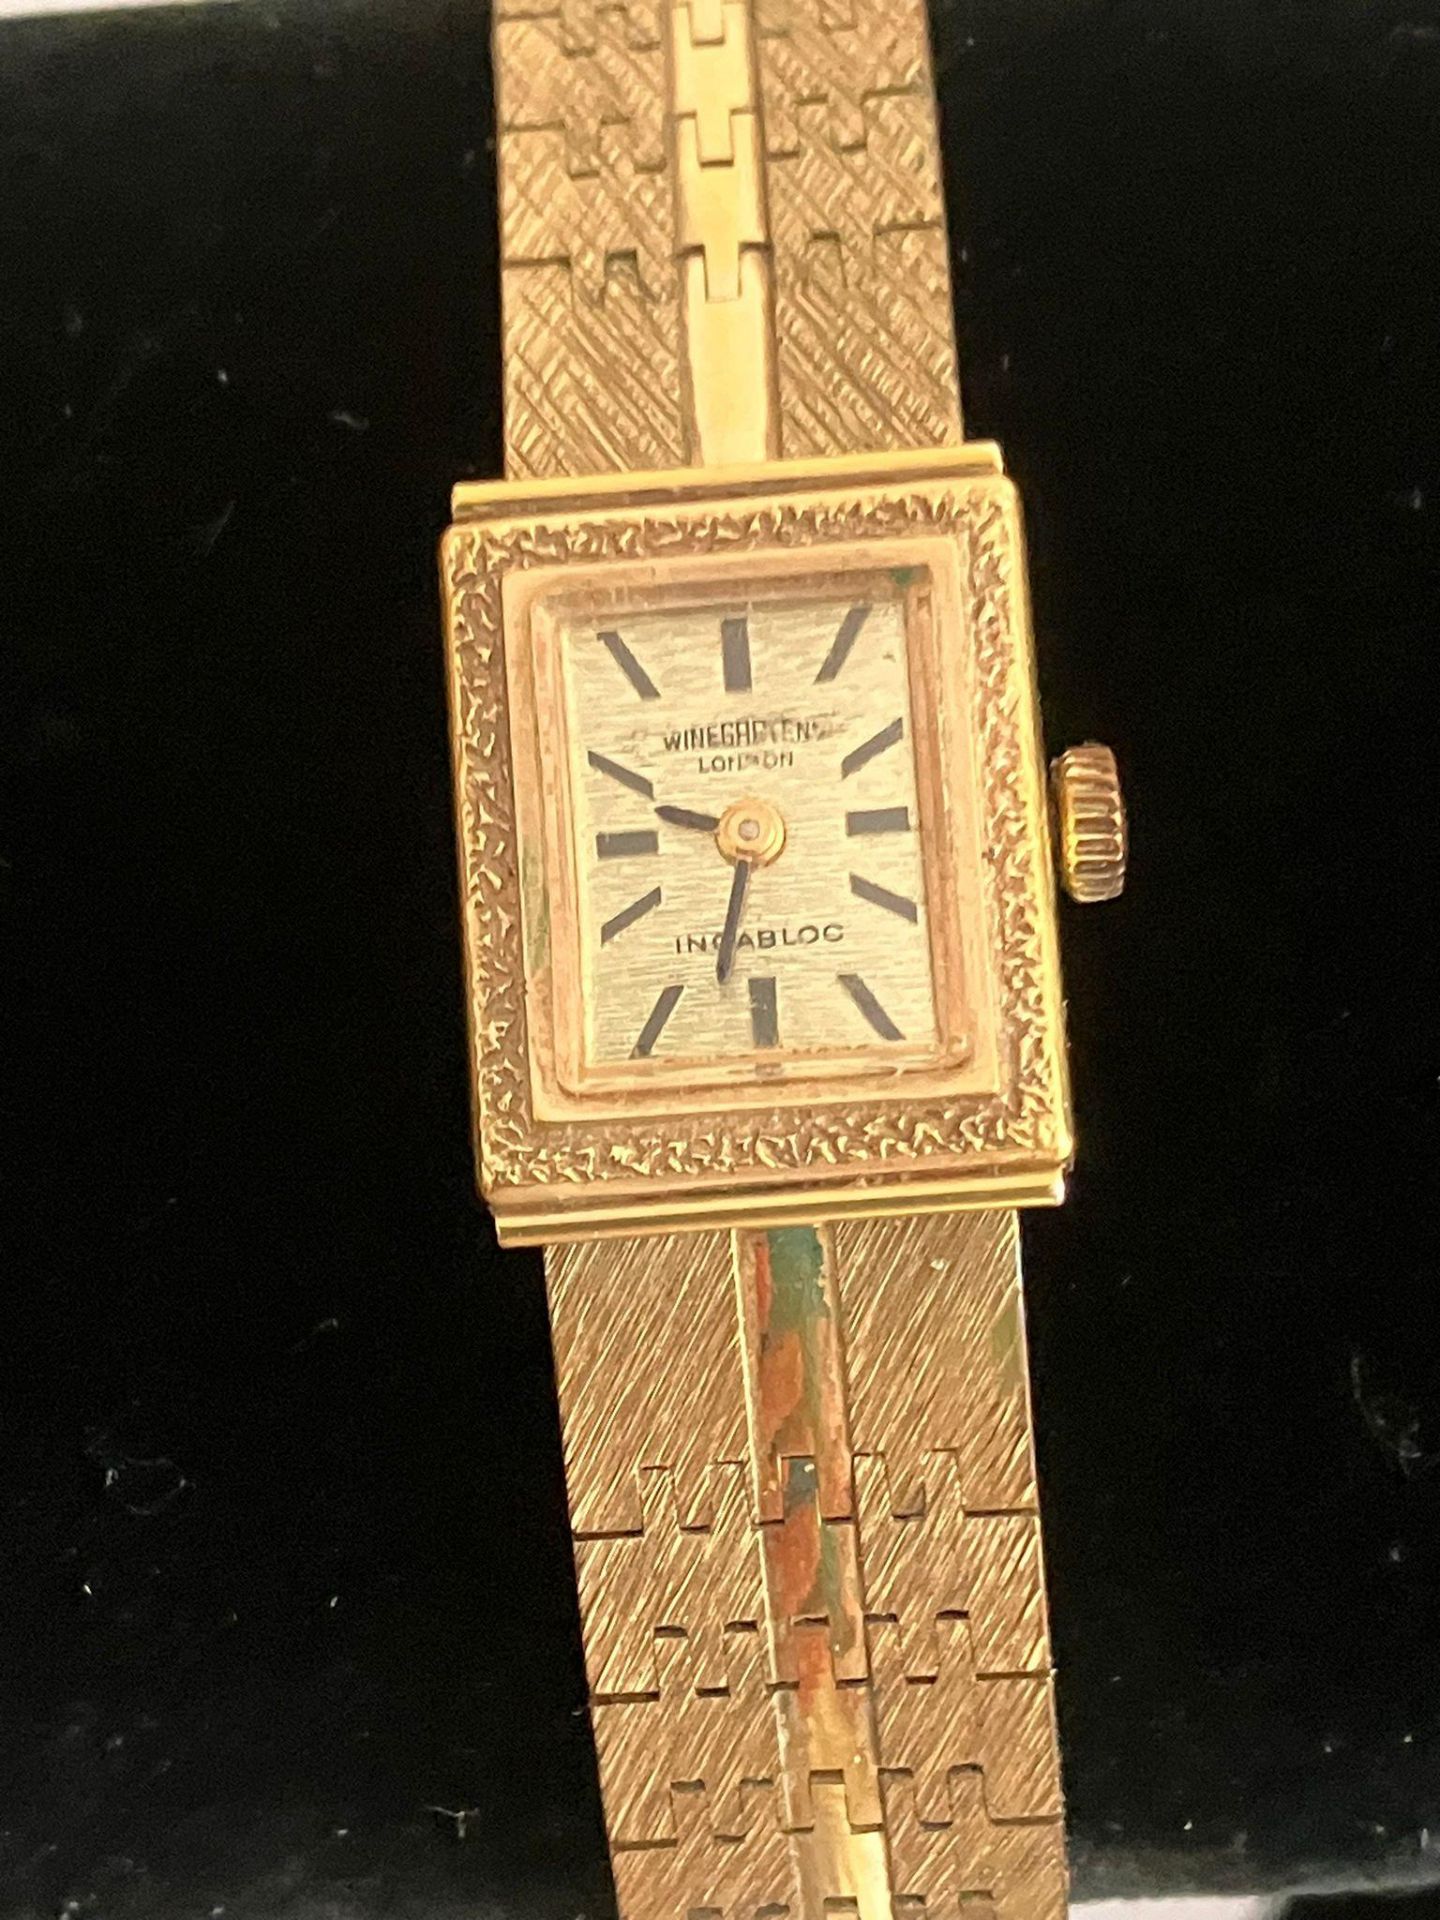 Ladies Vintage Winegartens Wristwatch. Heavily GOLD PLATED (20 microns). Square, face model.